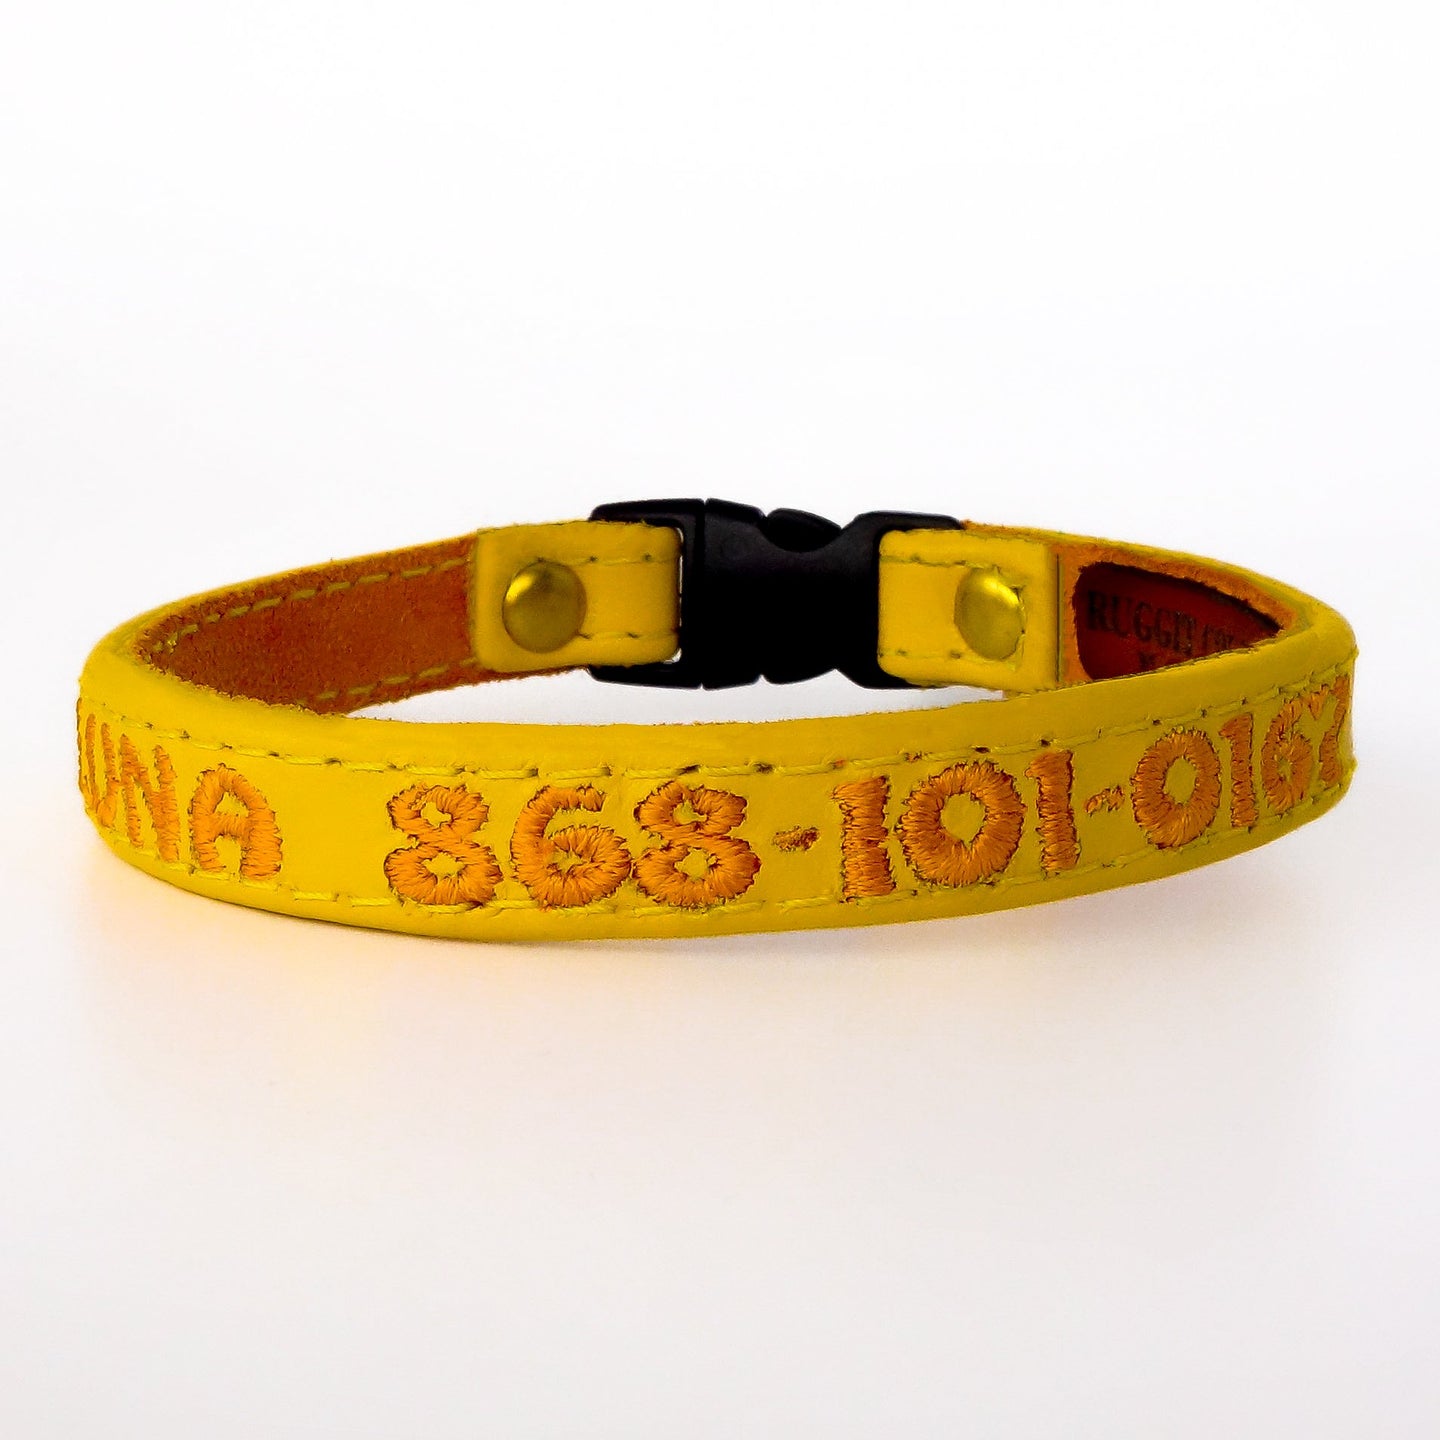 Embroidered Cat Collars